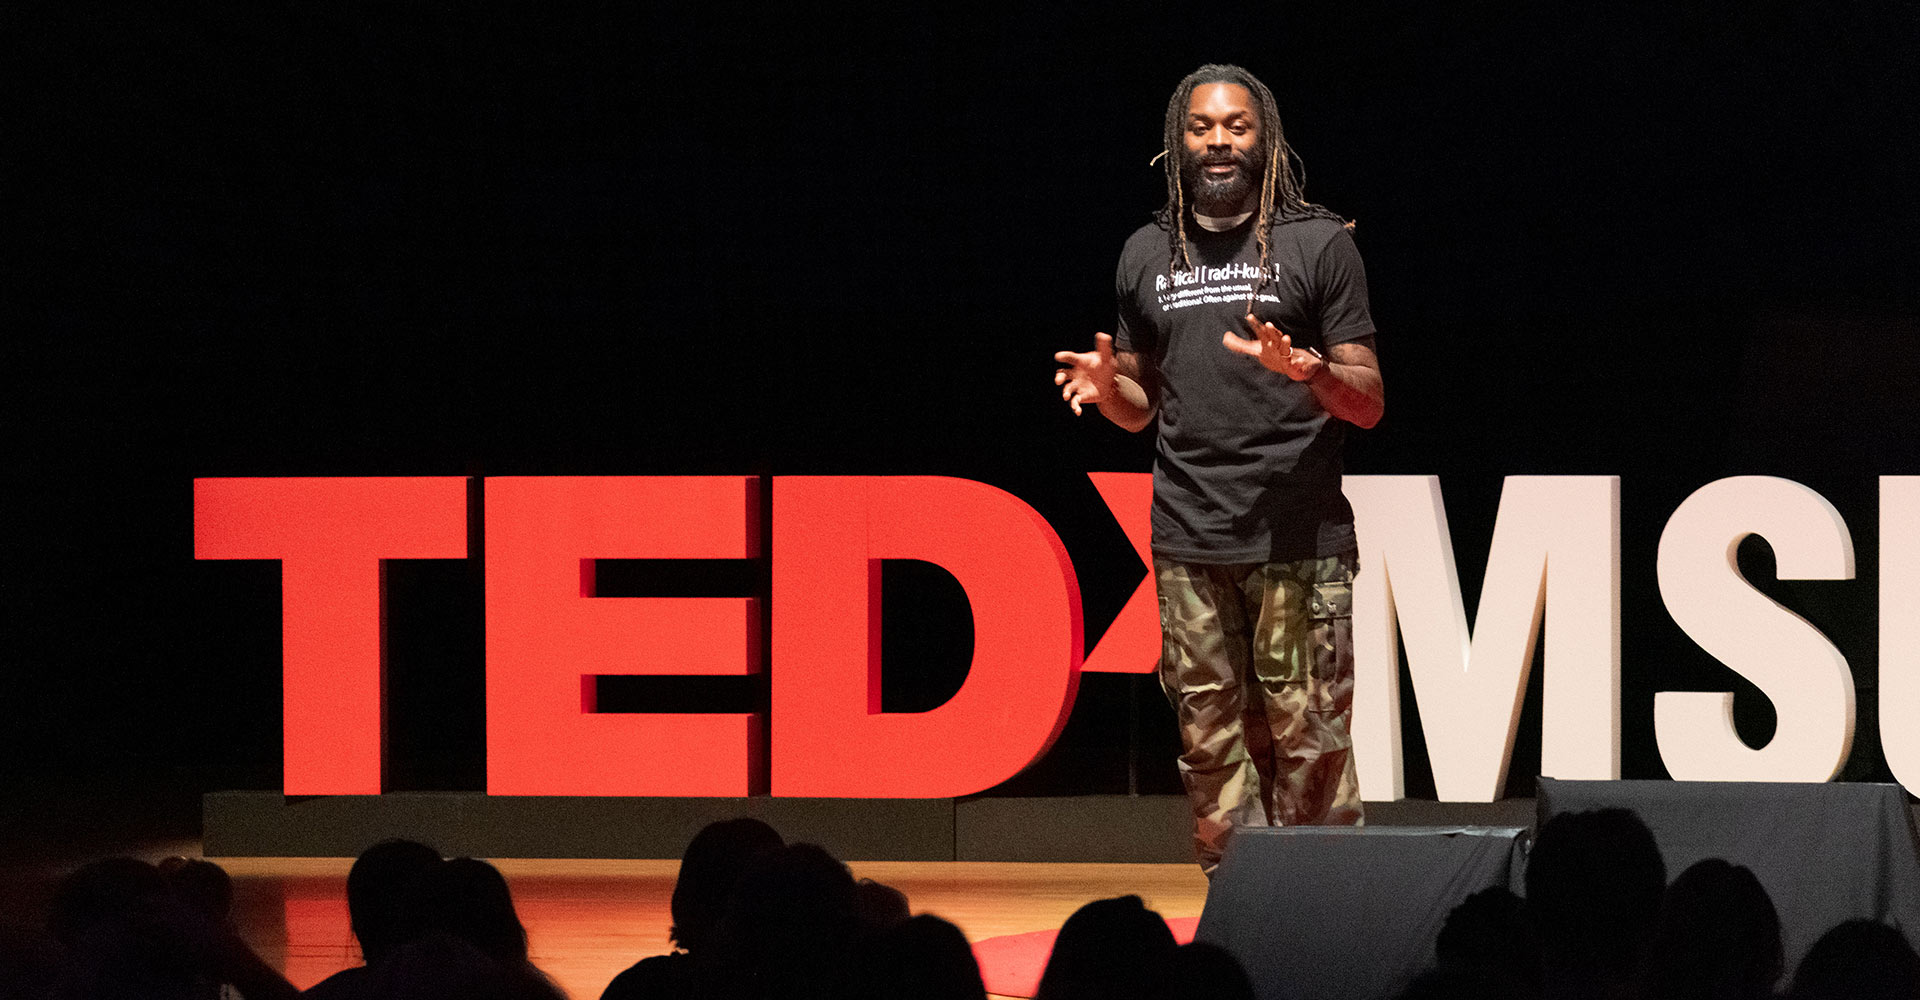 TEDx MSU Denver: What do tattoos and long hair got to do with it?